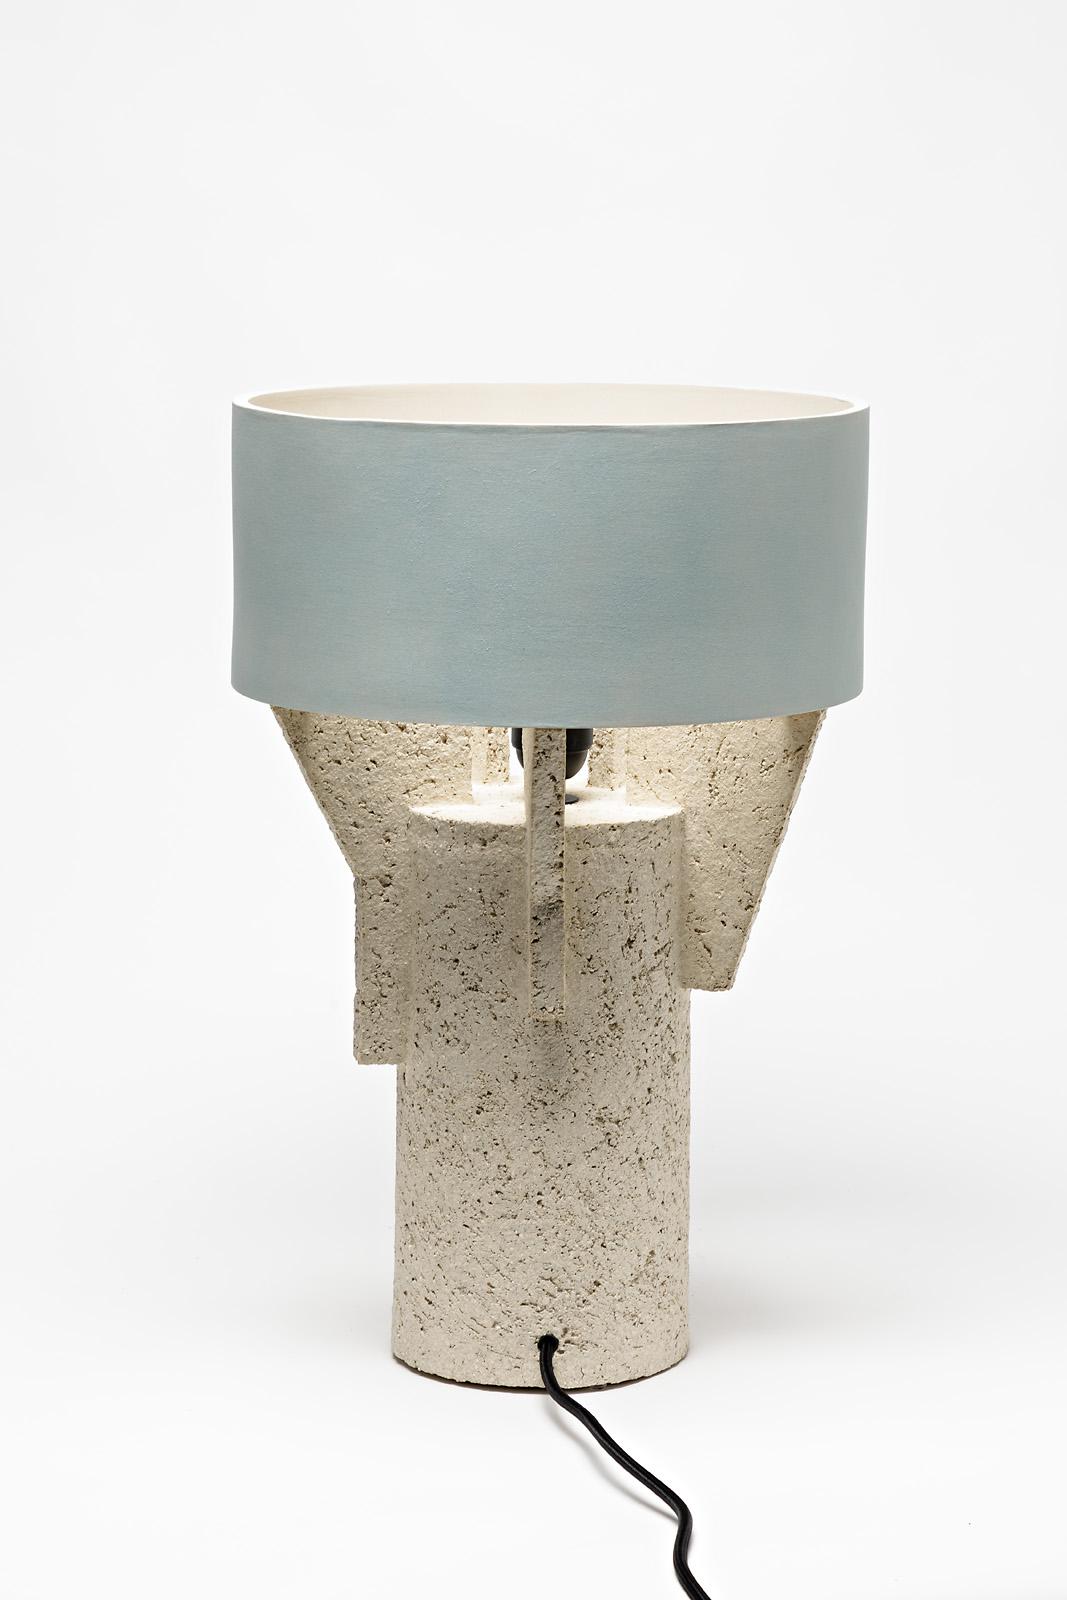 French Ceramic Table Lamp by Denis Castaing with Blue Glaze Decoration, 2019